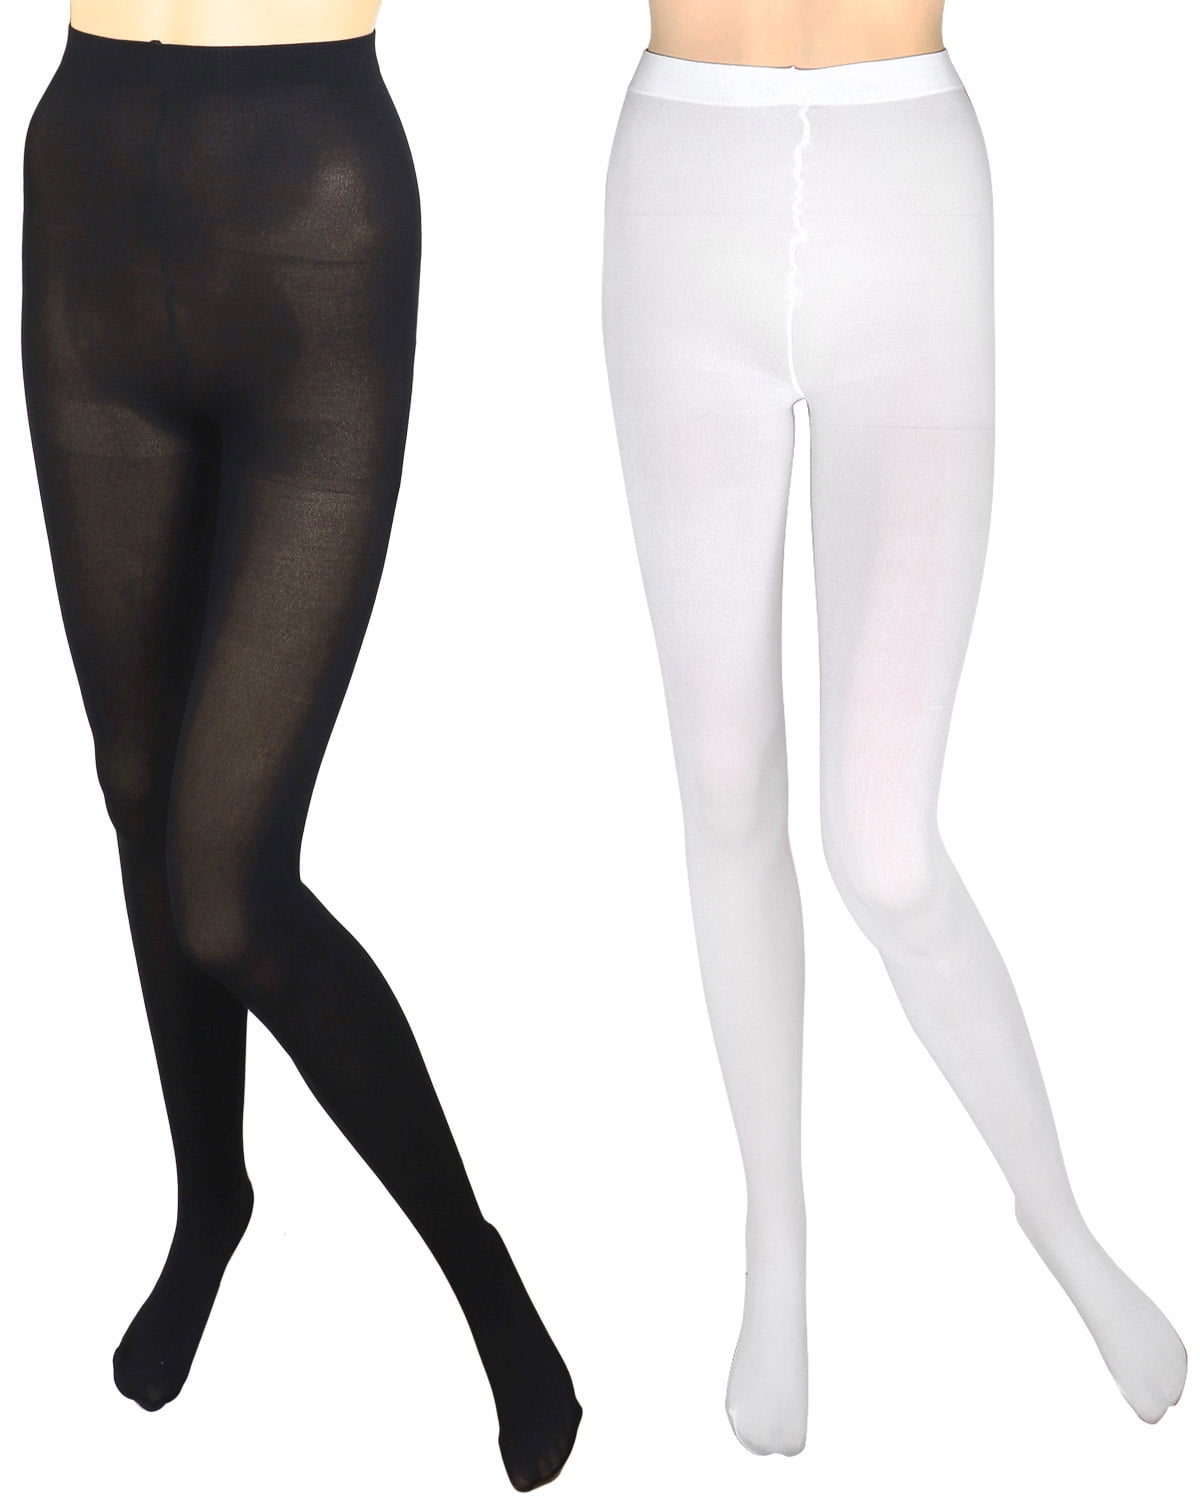 Back To School Girls 2 Pack Black 70 Denier Opaque Tights with Lycra 